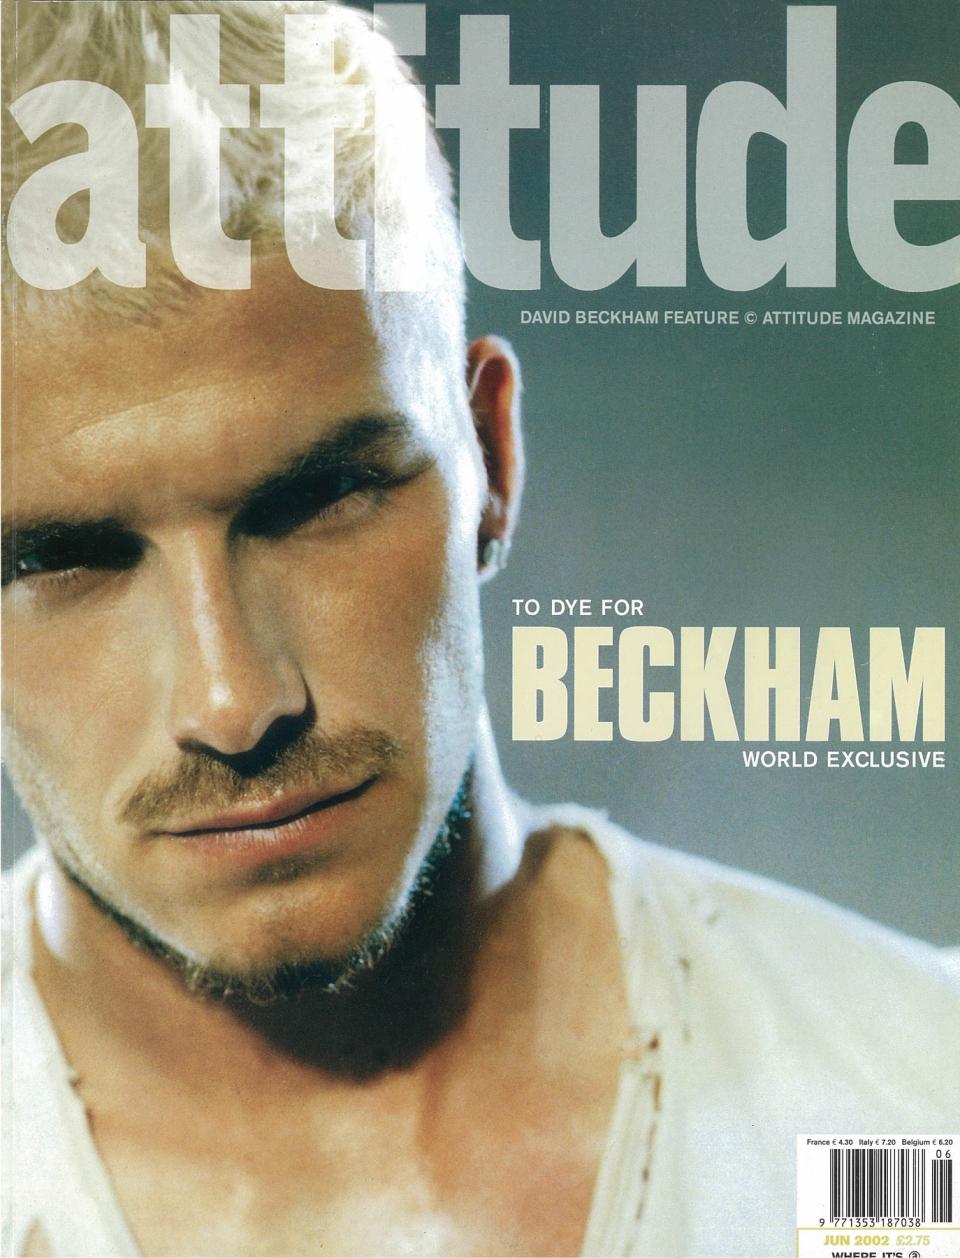 The famous Attitude magazine cover featuring David Beckham from 2002. (Attitude)